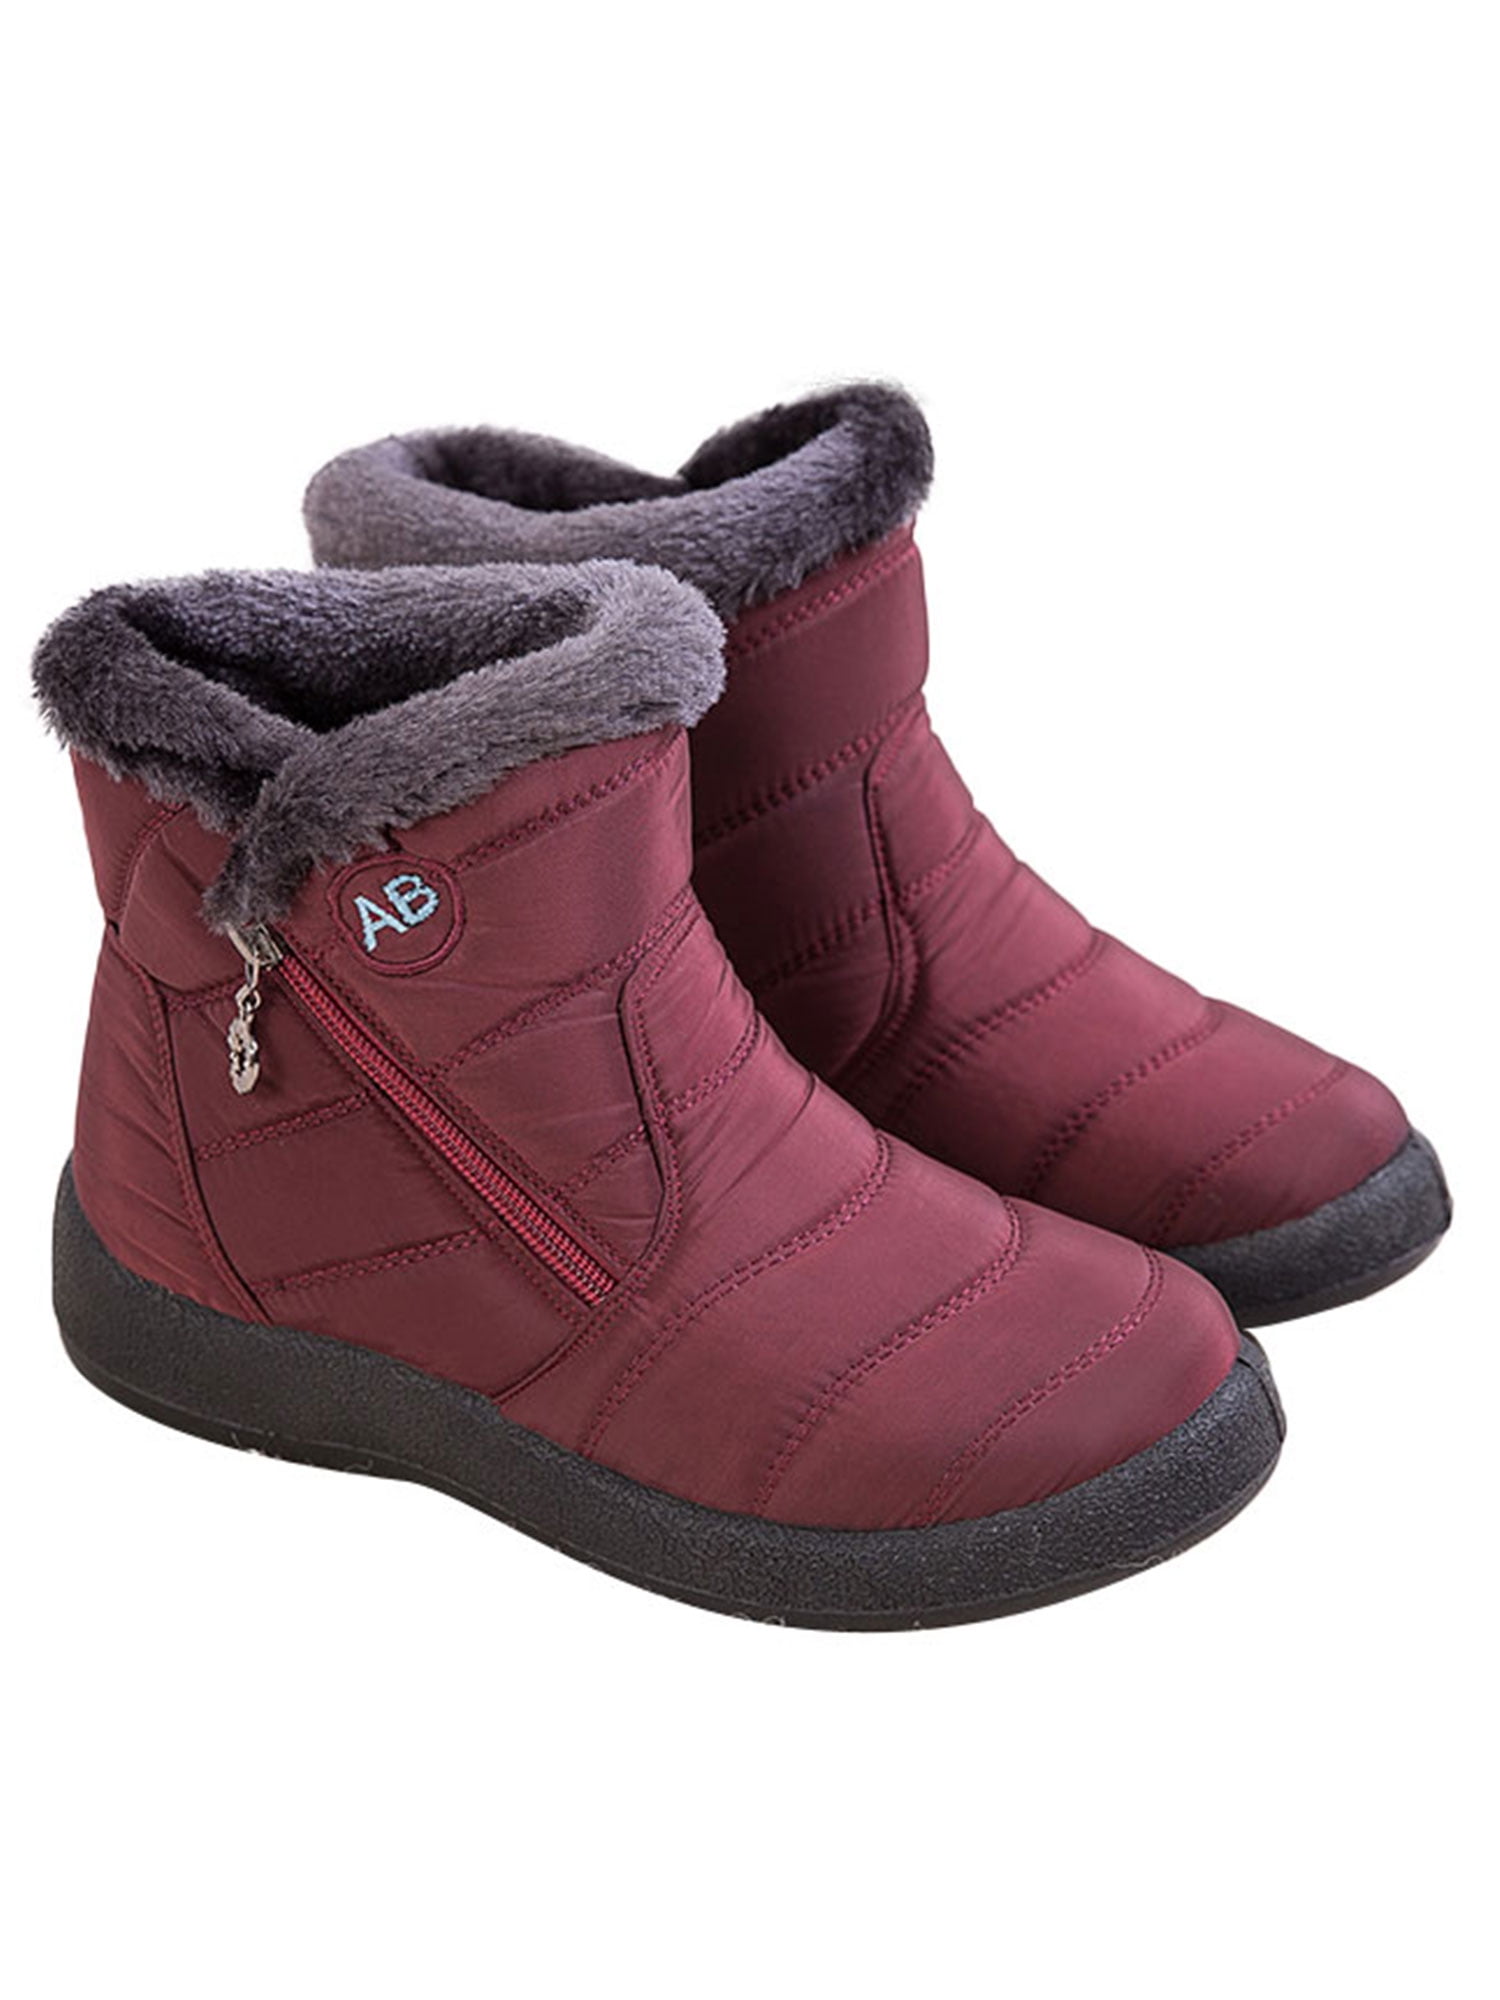 Hoxekle Woman Mid Calf Boots Lace Up Slip On Round Toe Mid Heel Faux Fur Winter Warm Ourdoor Sneaker Fashion Snow Boos